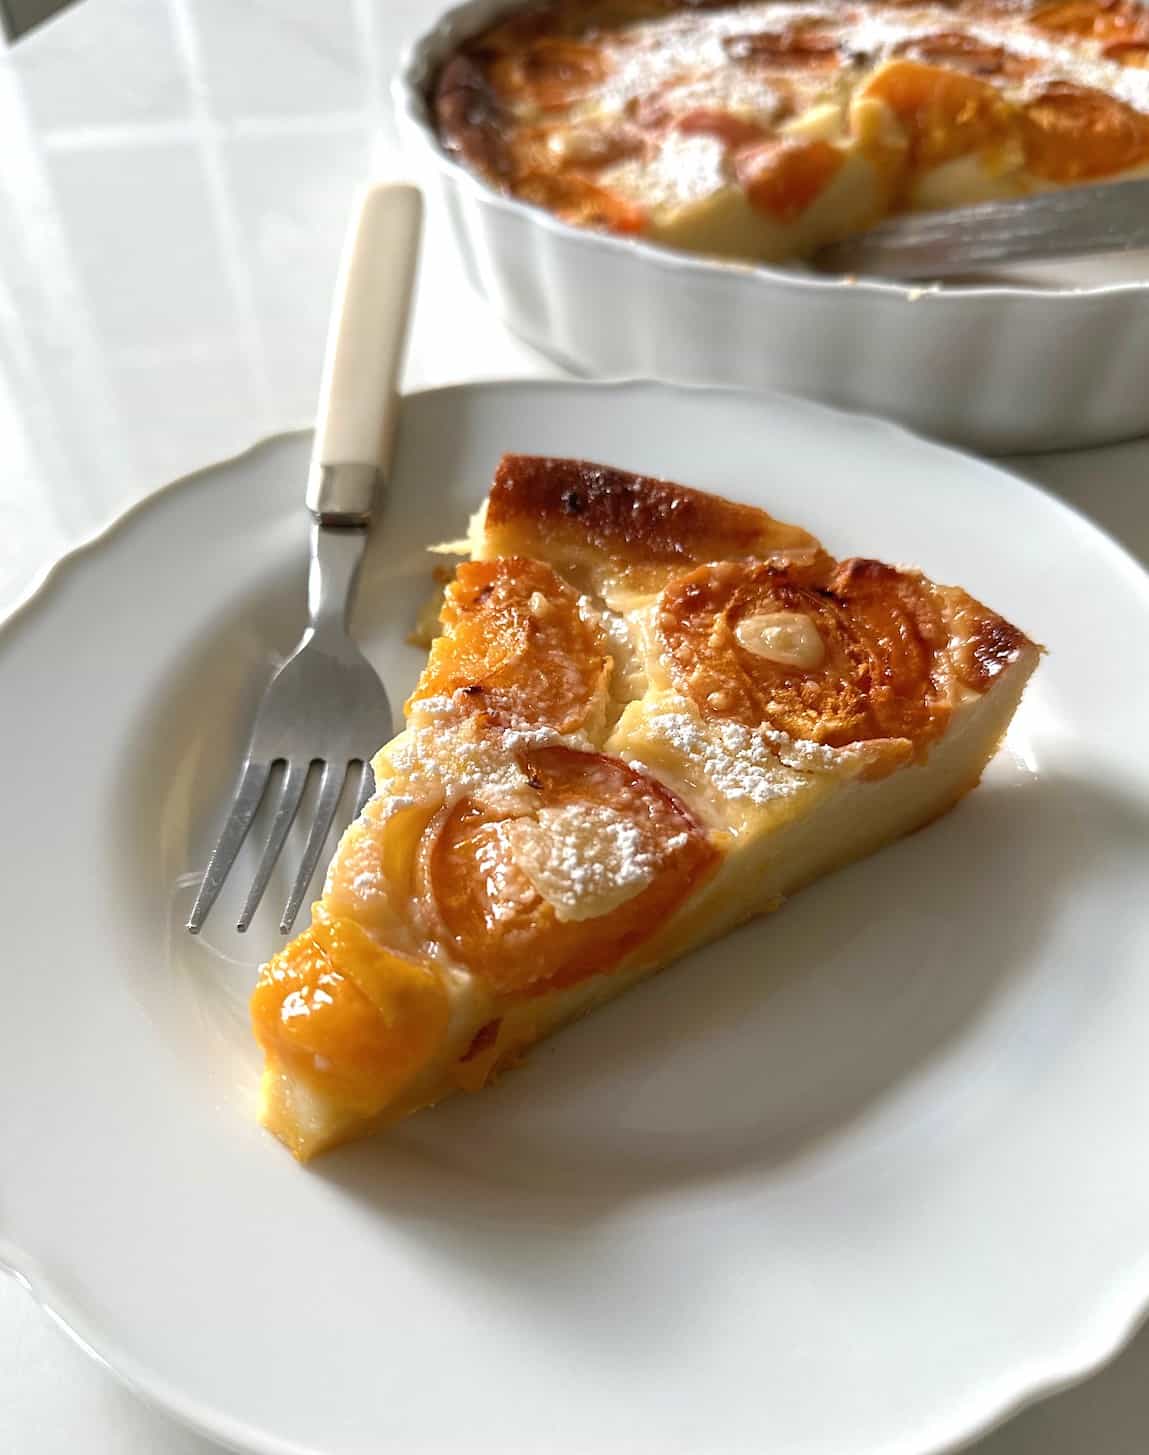 A slice of clafoutis with apricots on a plate